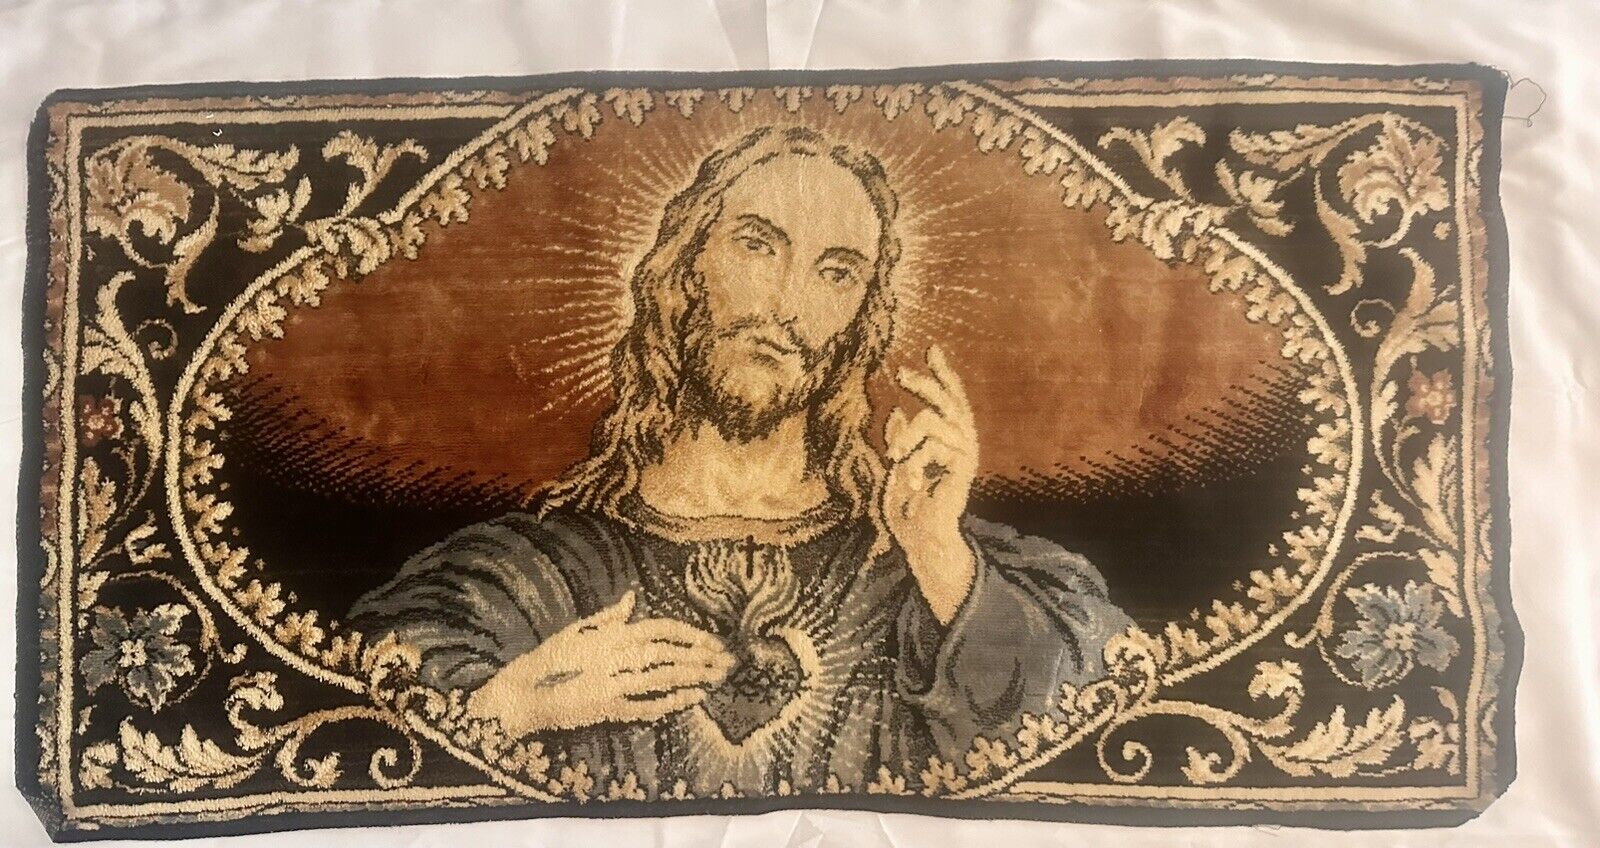 Vintage Catholic Sacred Heart of Jesus Woven Stitch Tapestry Wall Hanging 37x20